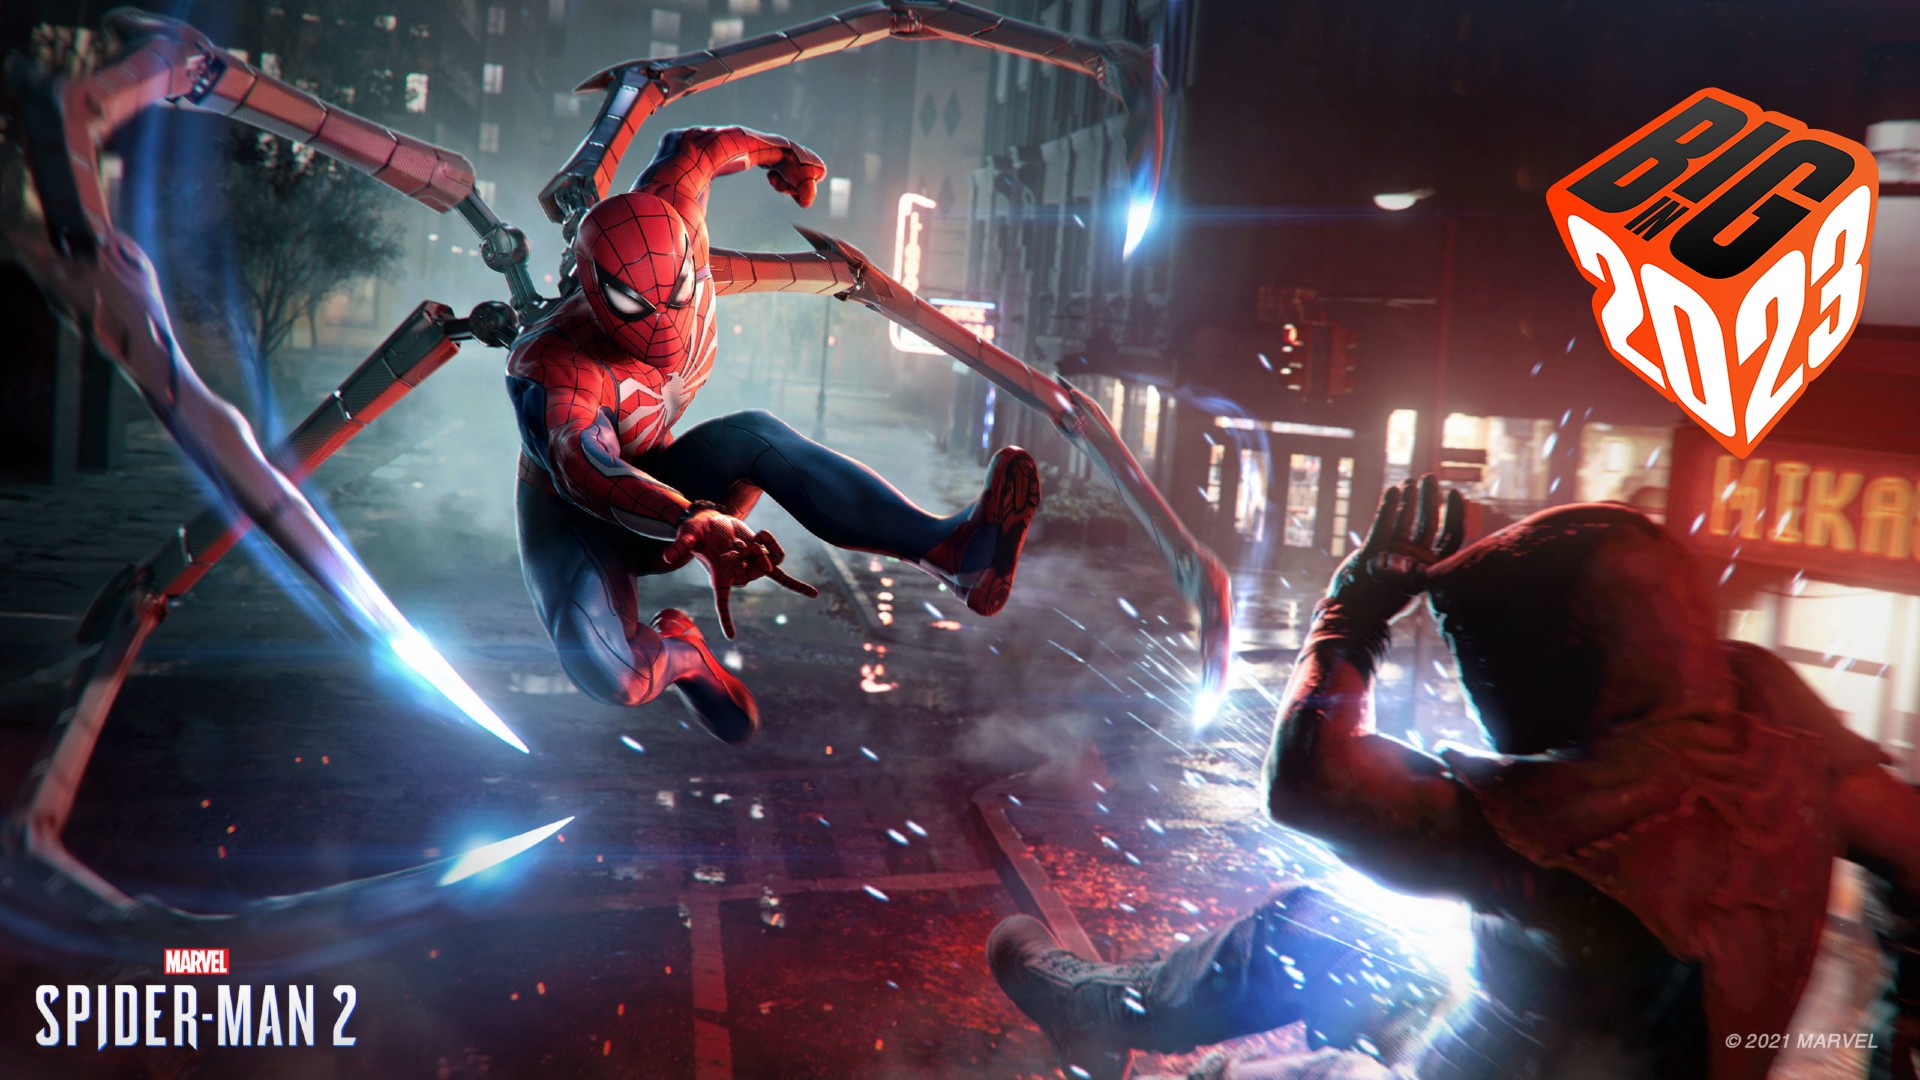 Marvel's Spider-Man 2 Highest Rated Game by Insomniac Games, Shares the  Spot with 2 Other